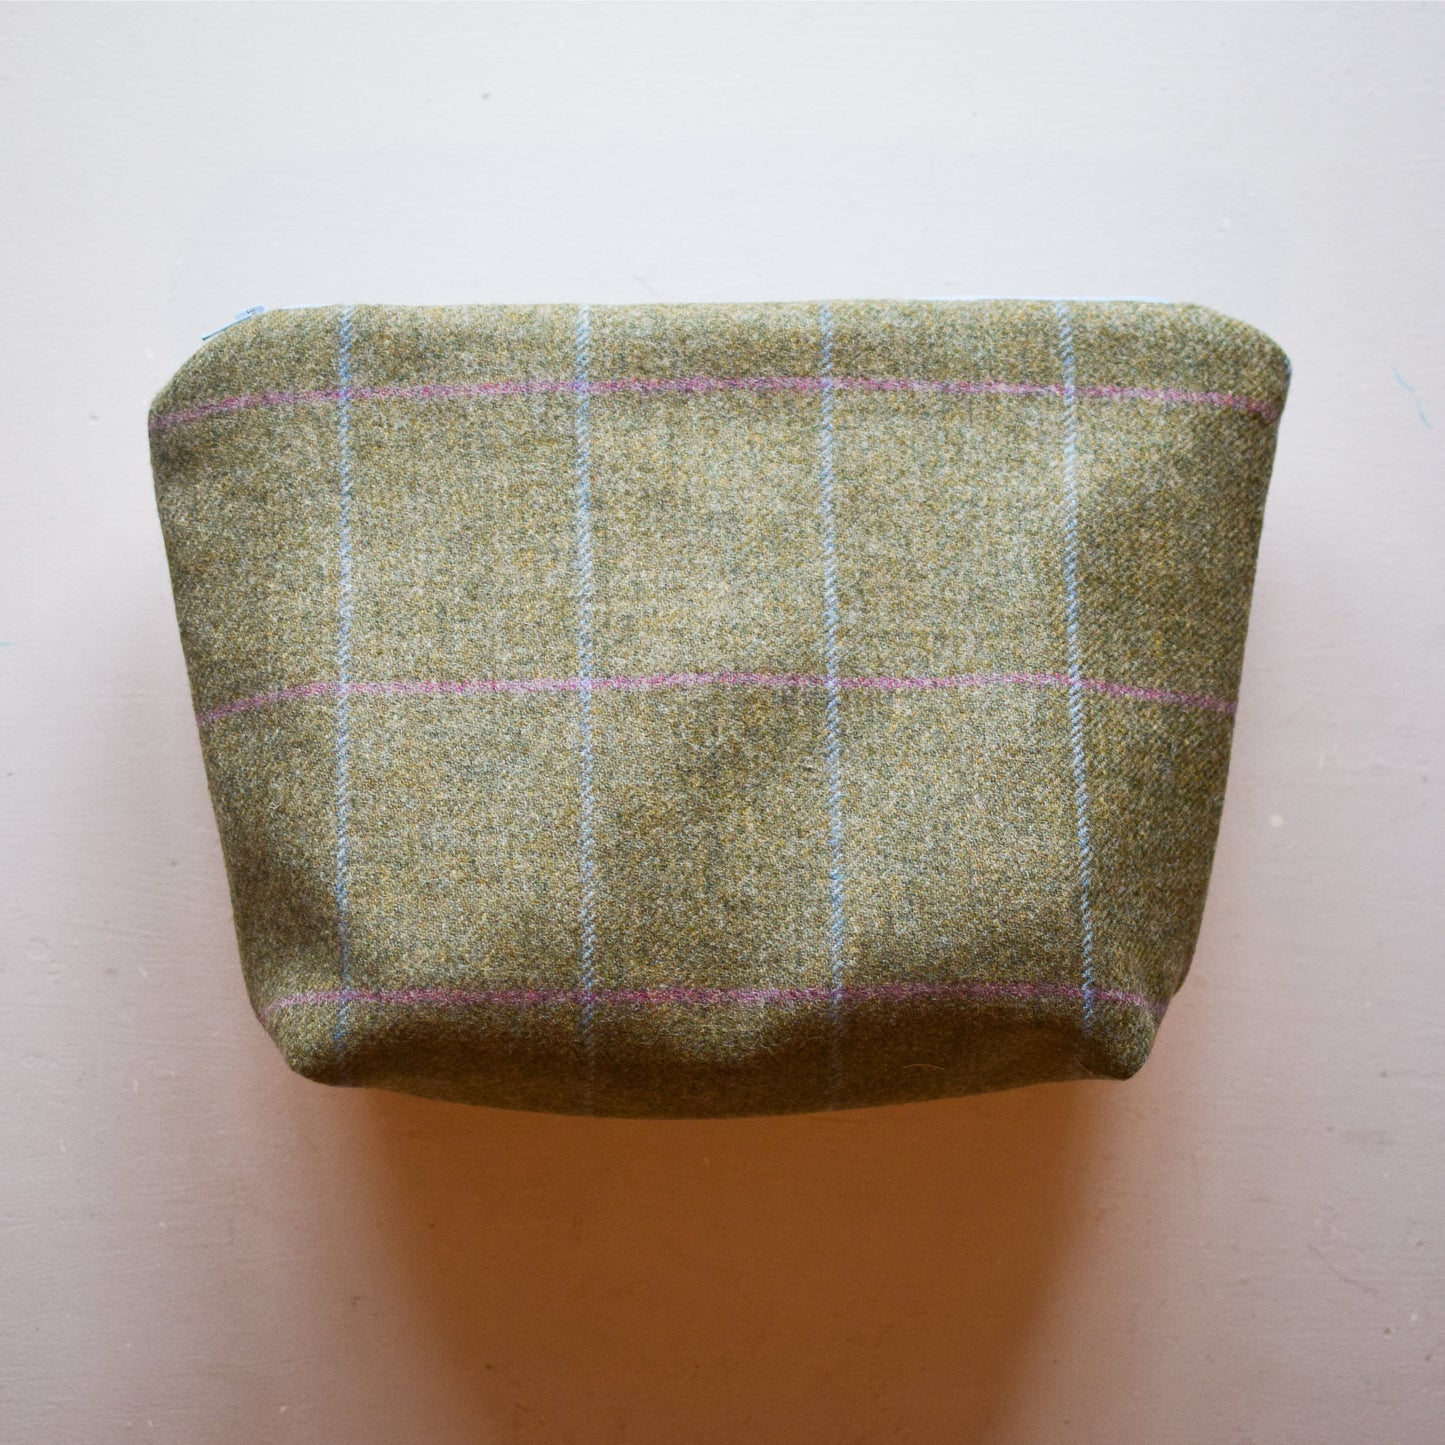 Green light blue and pink tweed wash bag handmade by F&B